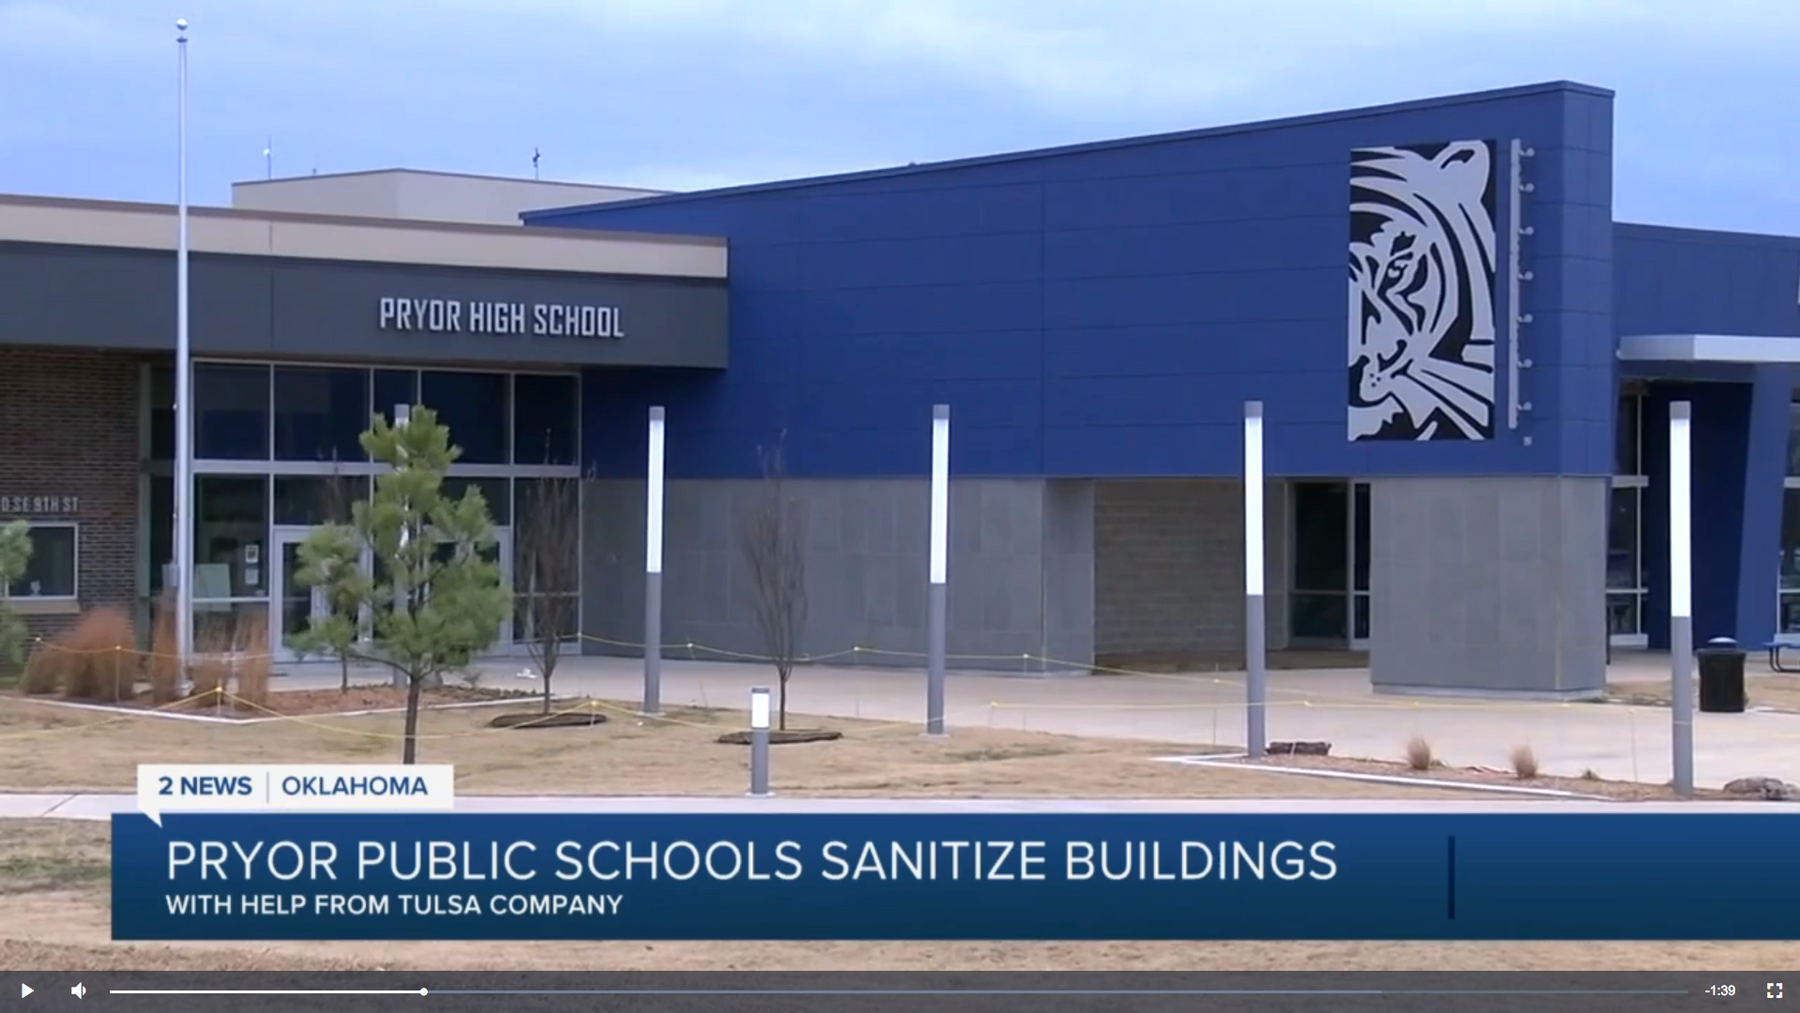 Pryor Public Schools sanitizes buildings with help from Tulsa manufacturer